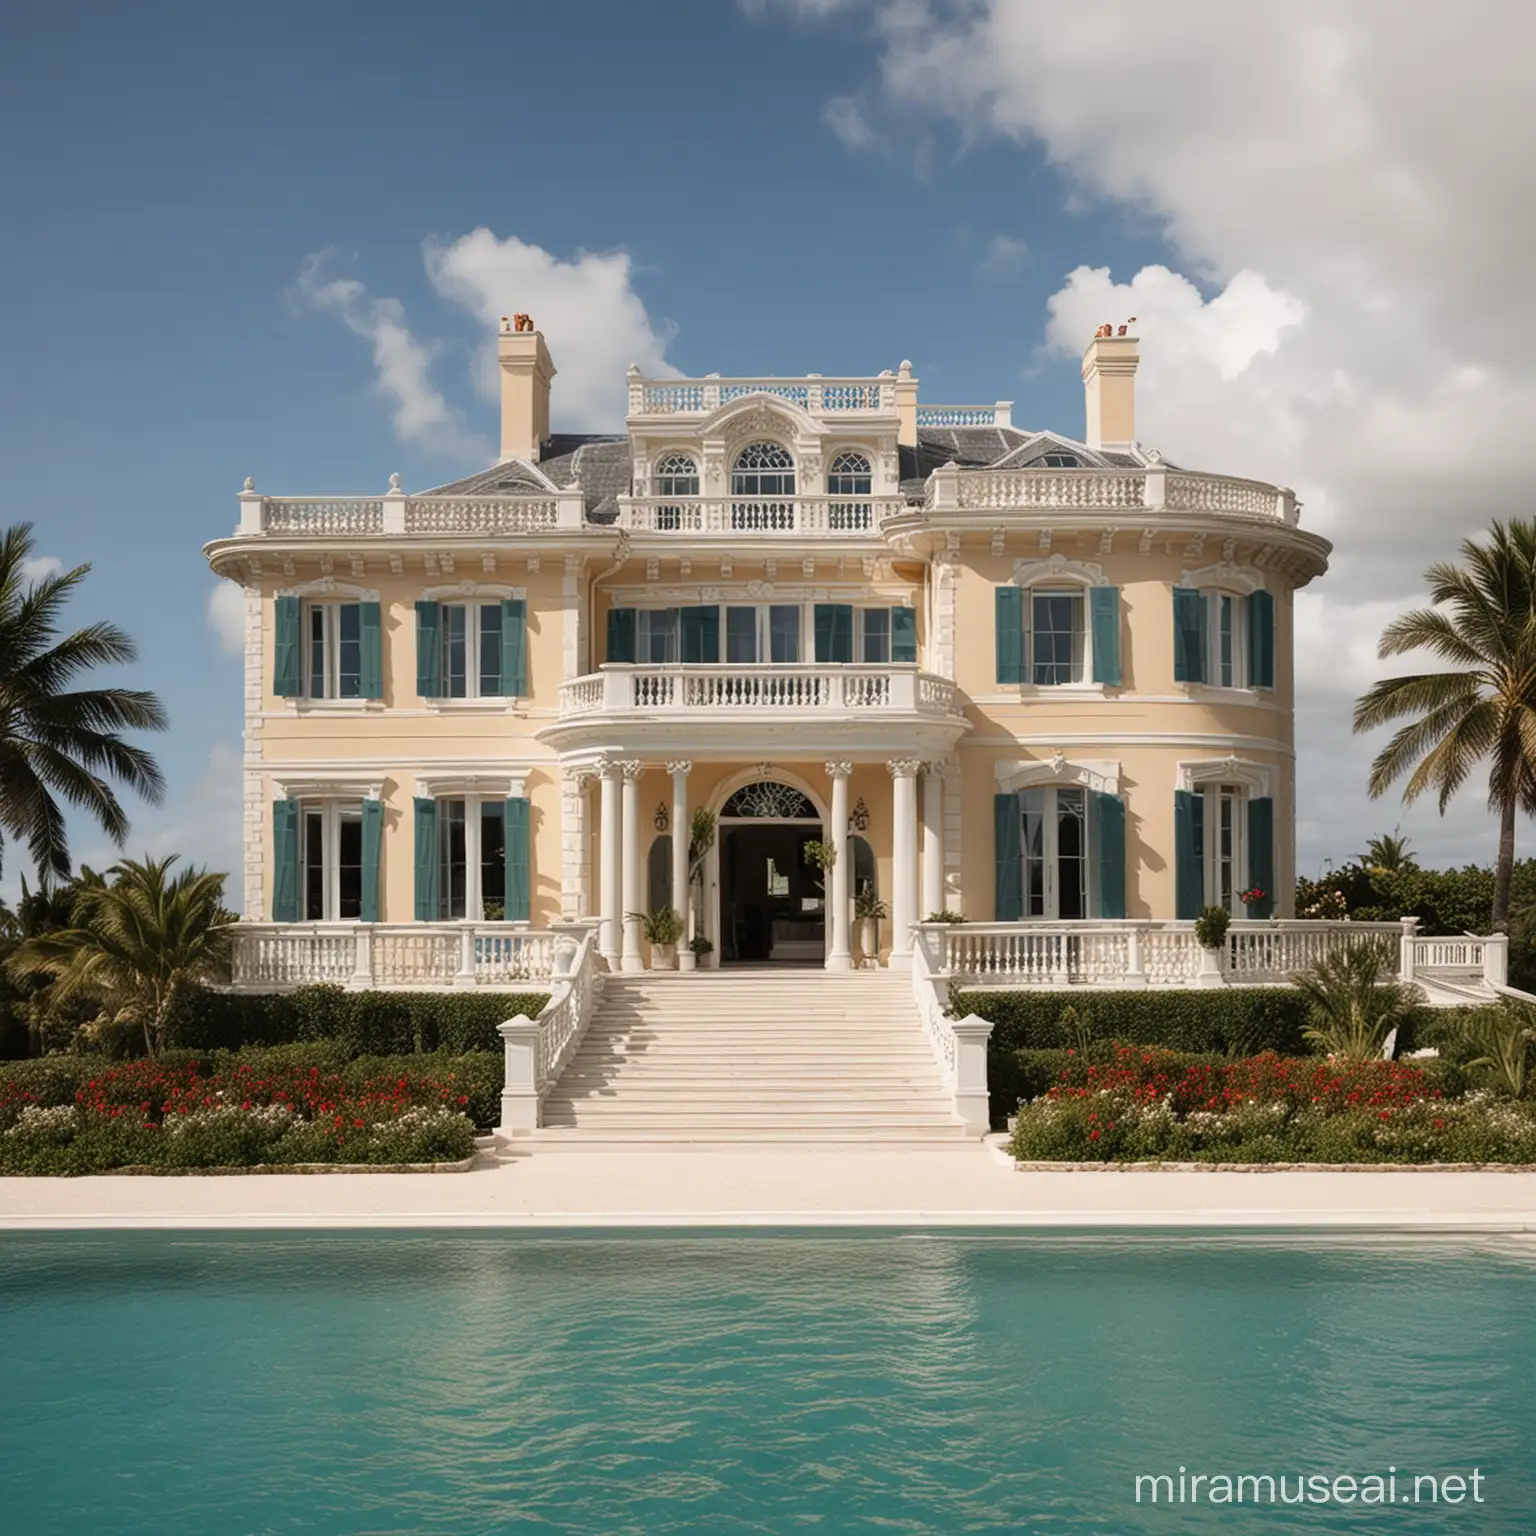 very expensive looking 2flore house in island
